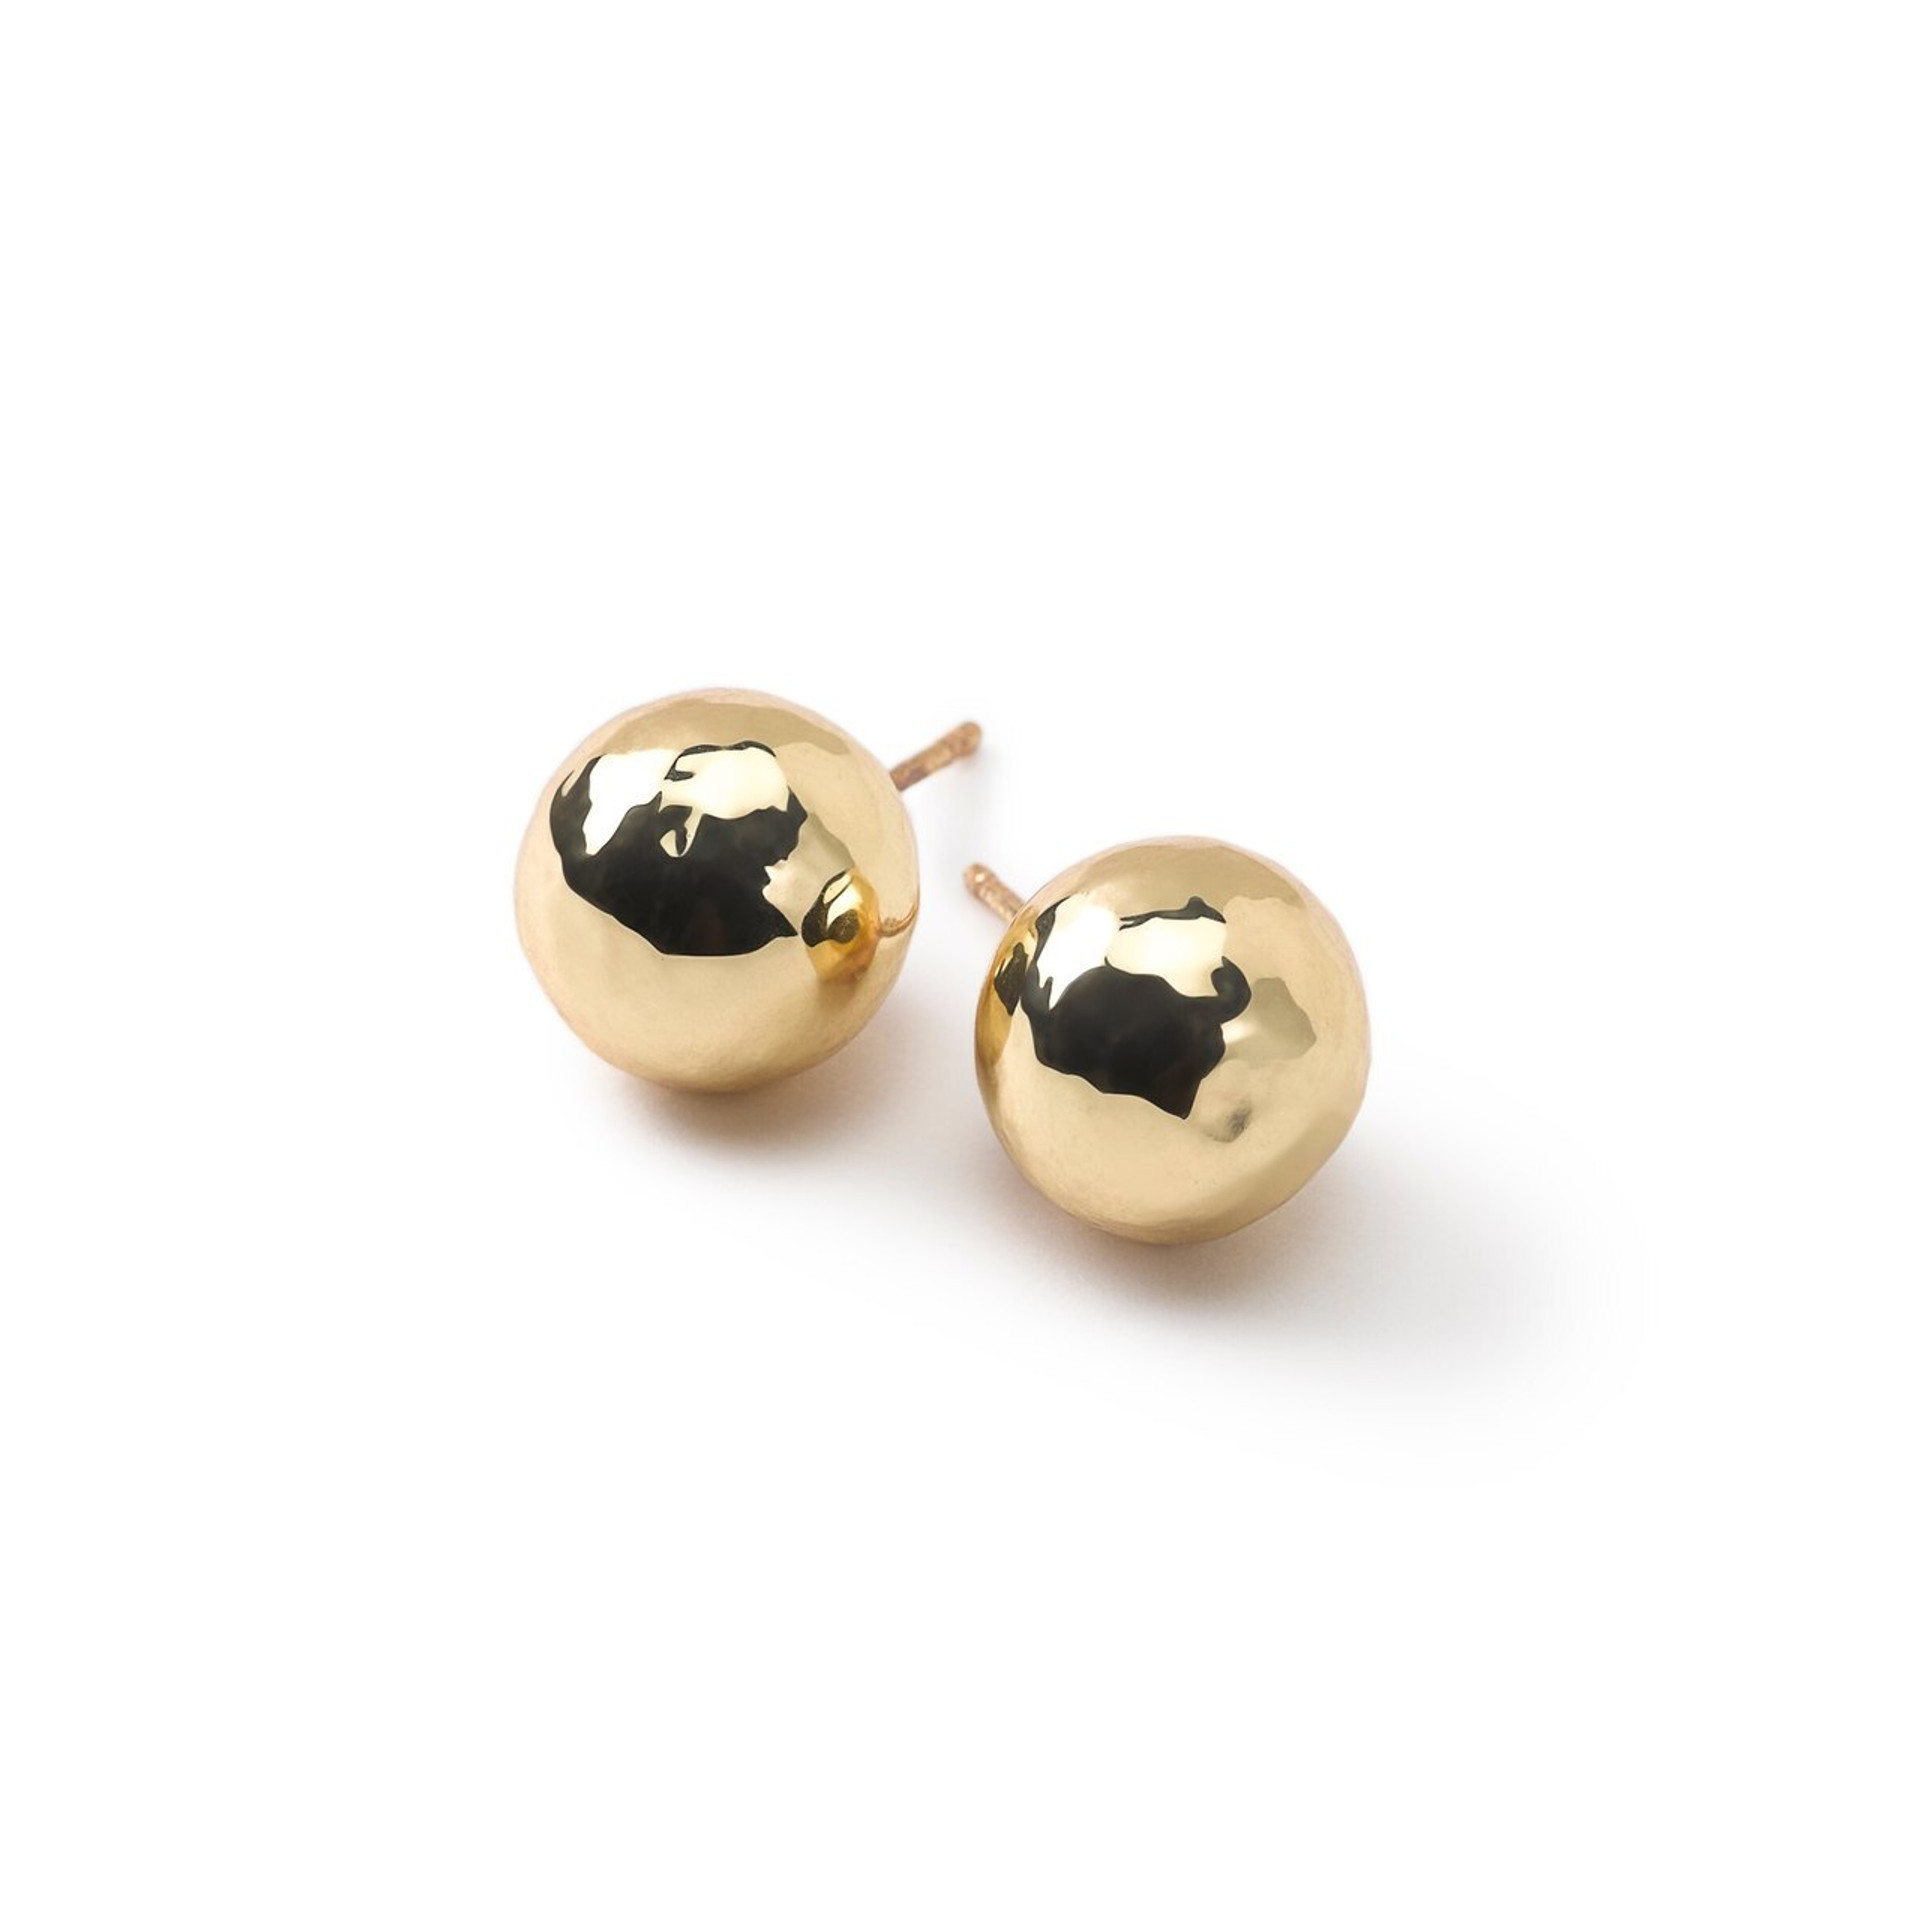 IPPOLITA Classico Hammered Ball Stud Earrings in 18K Gold